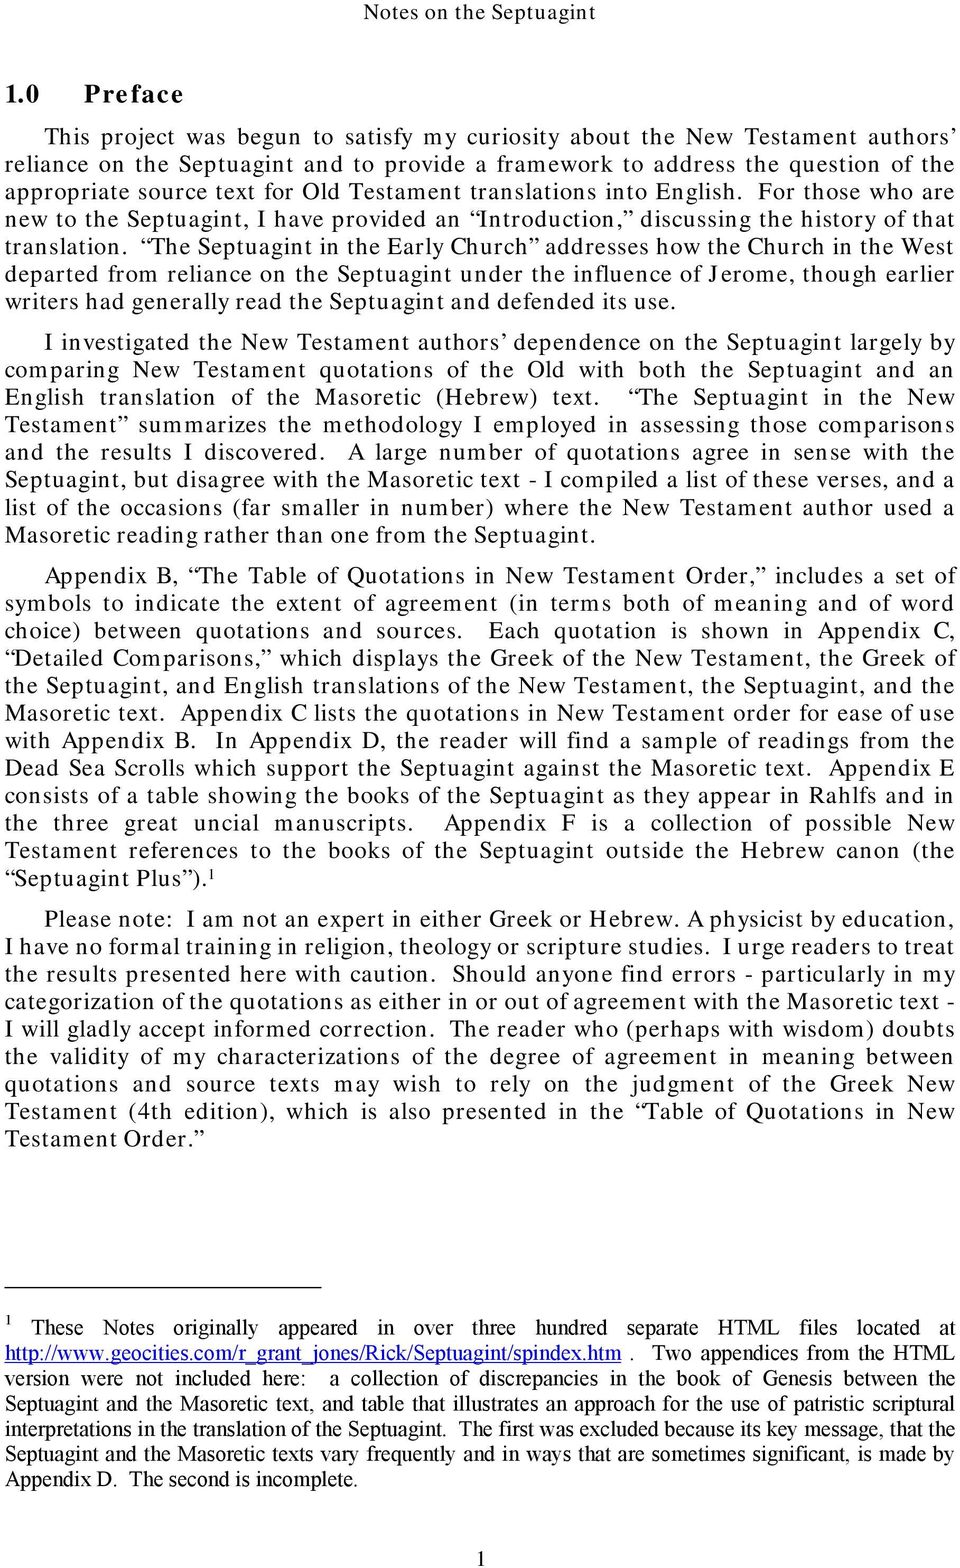 The Septuagint in the Early Church addresses how the Church in the West departed from reliance on the Septuagint under the influence of Jerome, though earlier writers had generally read the